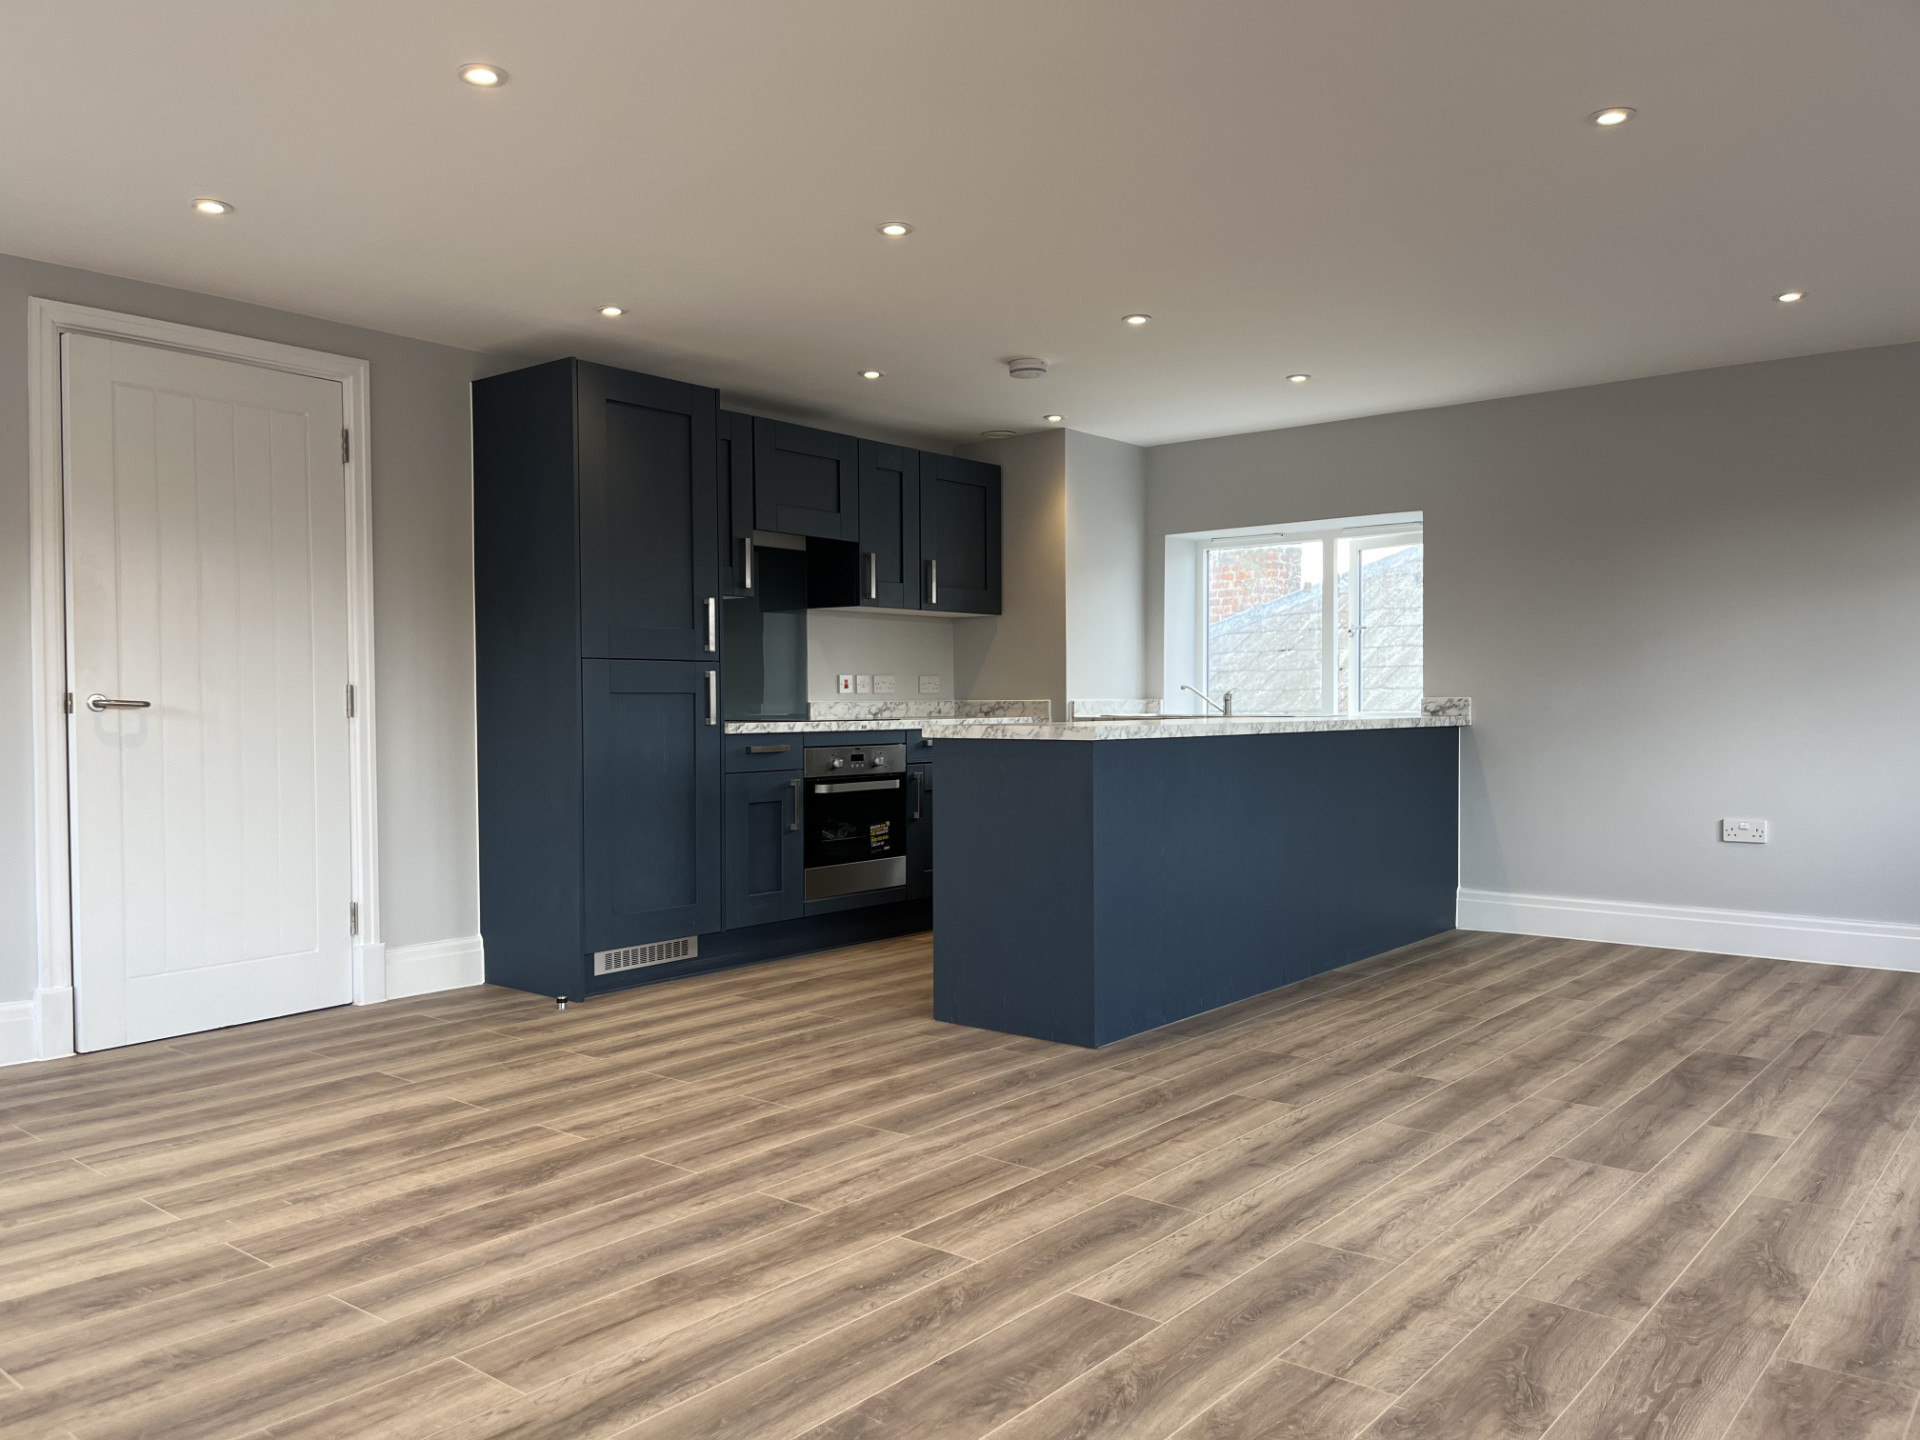 Interior Penthouse kitchen space at 19 Eastgate, Chester, Cheshire, 2023